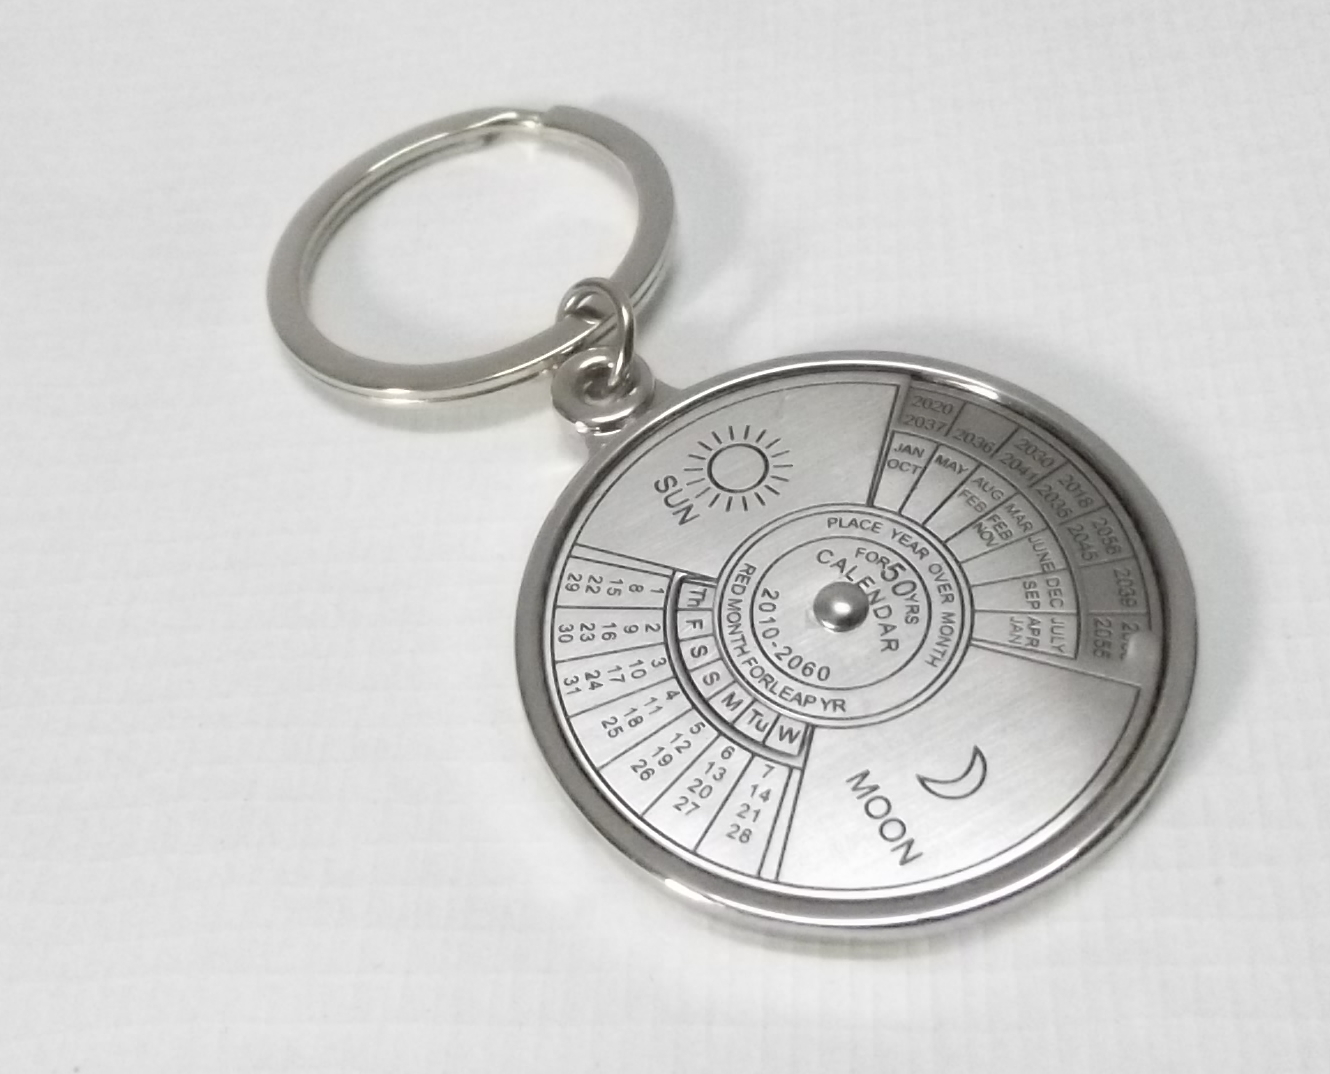 50 years perpetual calendar Keyring/ Key Chain in Compass Style at Best